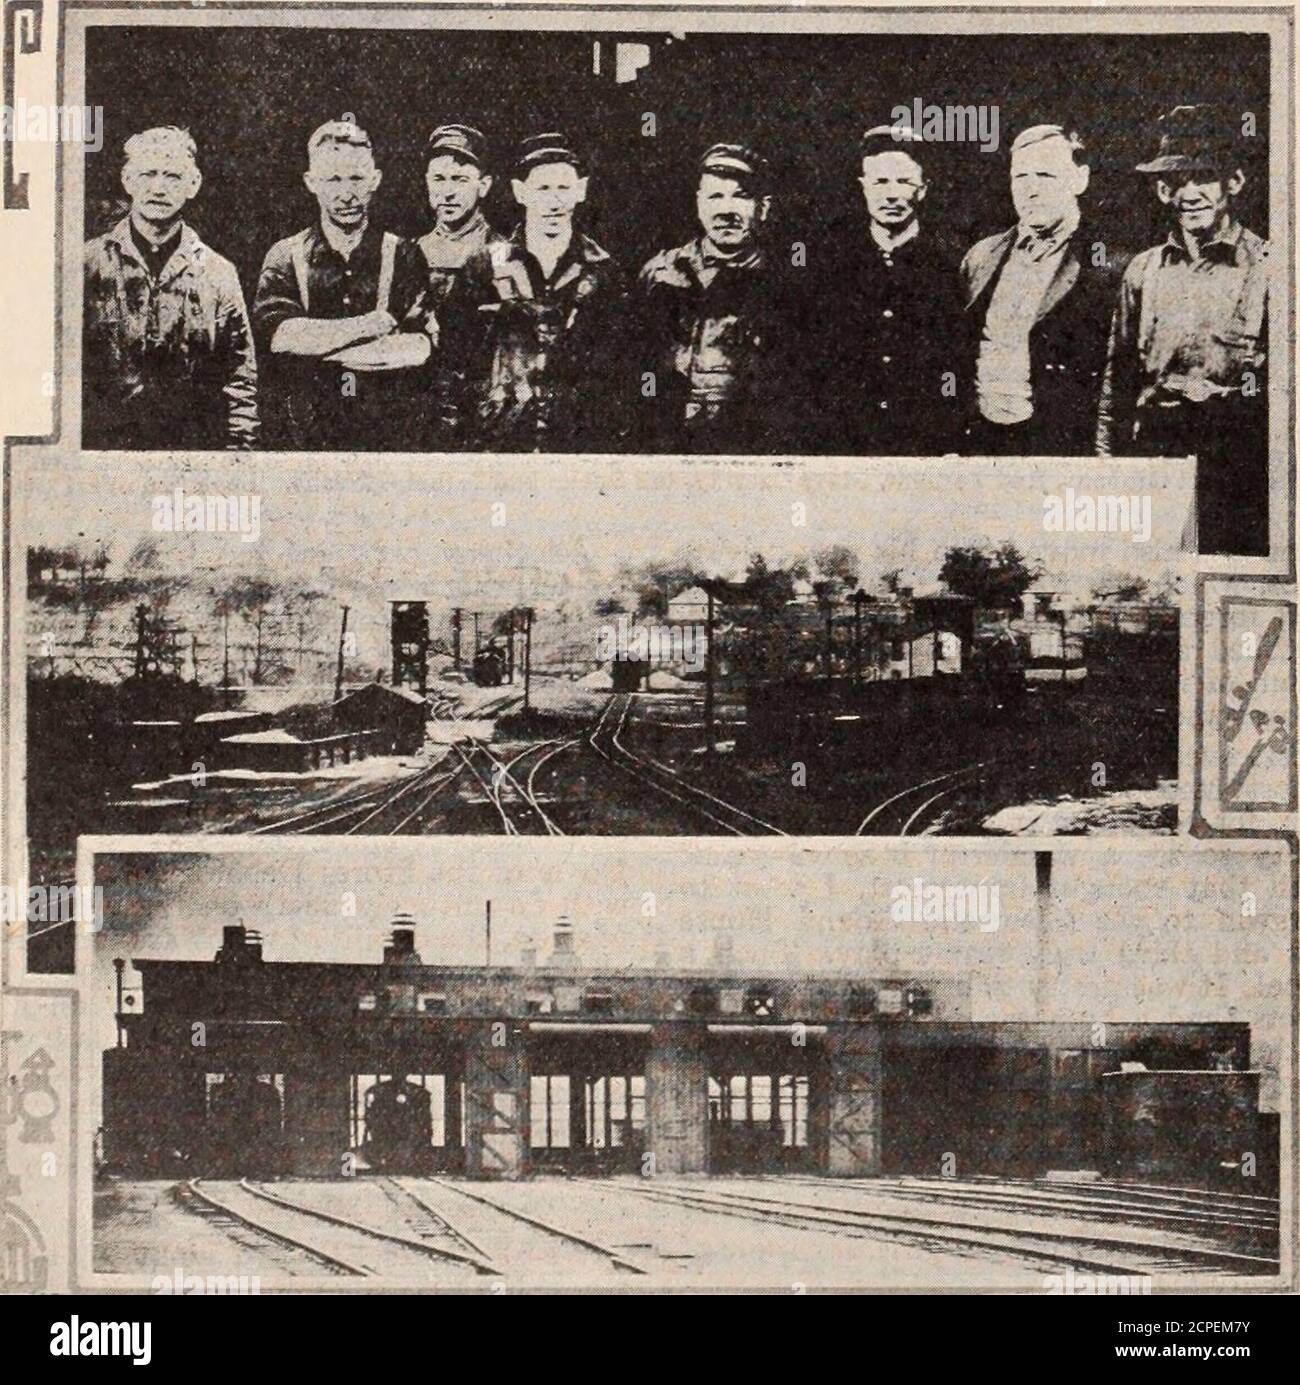 . Baltimore and Ohio employees magazine . Somebody ought to find a good use for oldties—both railroad and neck. —Pathfinder. J. C. Bishop, H. E. Knight and HillardG. A. Hannan have their lunch and Javaat the Dew Drop Inn, River Street, TygartsJunction, regularly now. A. McCoy and H. H. PoHng wear pleasantsmiles since their Sheffield motor, for usebetween Tygart Junction and Belington,has been returned from the shops. Car Repairman John Waters is out againafter a few days illness. Glad to see you,Hot Box. The accompanying phonograph is of Doug-las Fleming, Fairmont, W. Va., vaudevilleperformer, Stock Photo